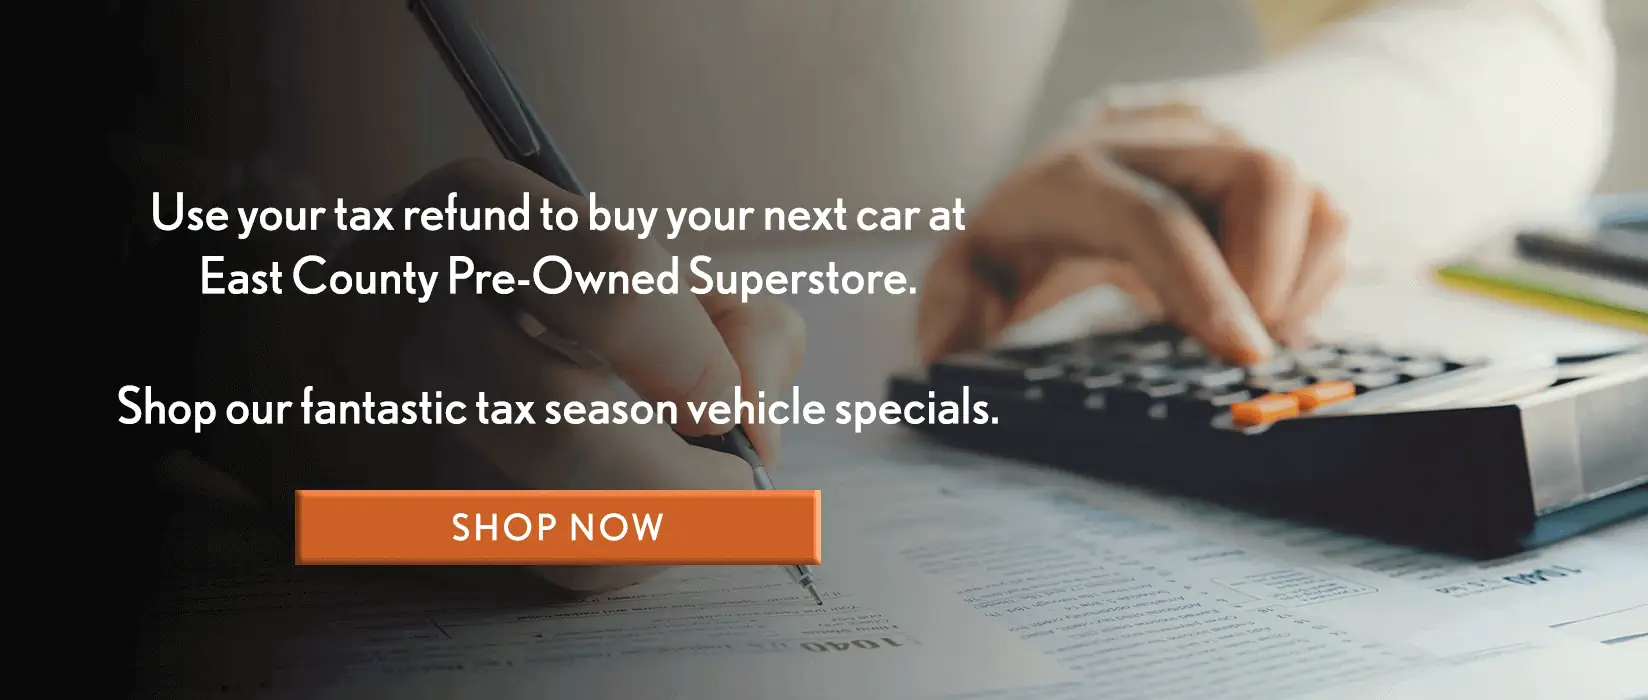 Use yorur tax refund to buy your next car